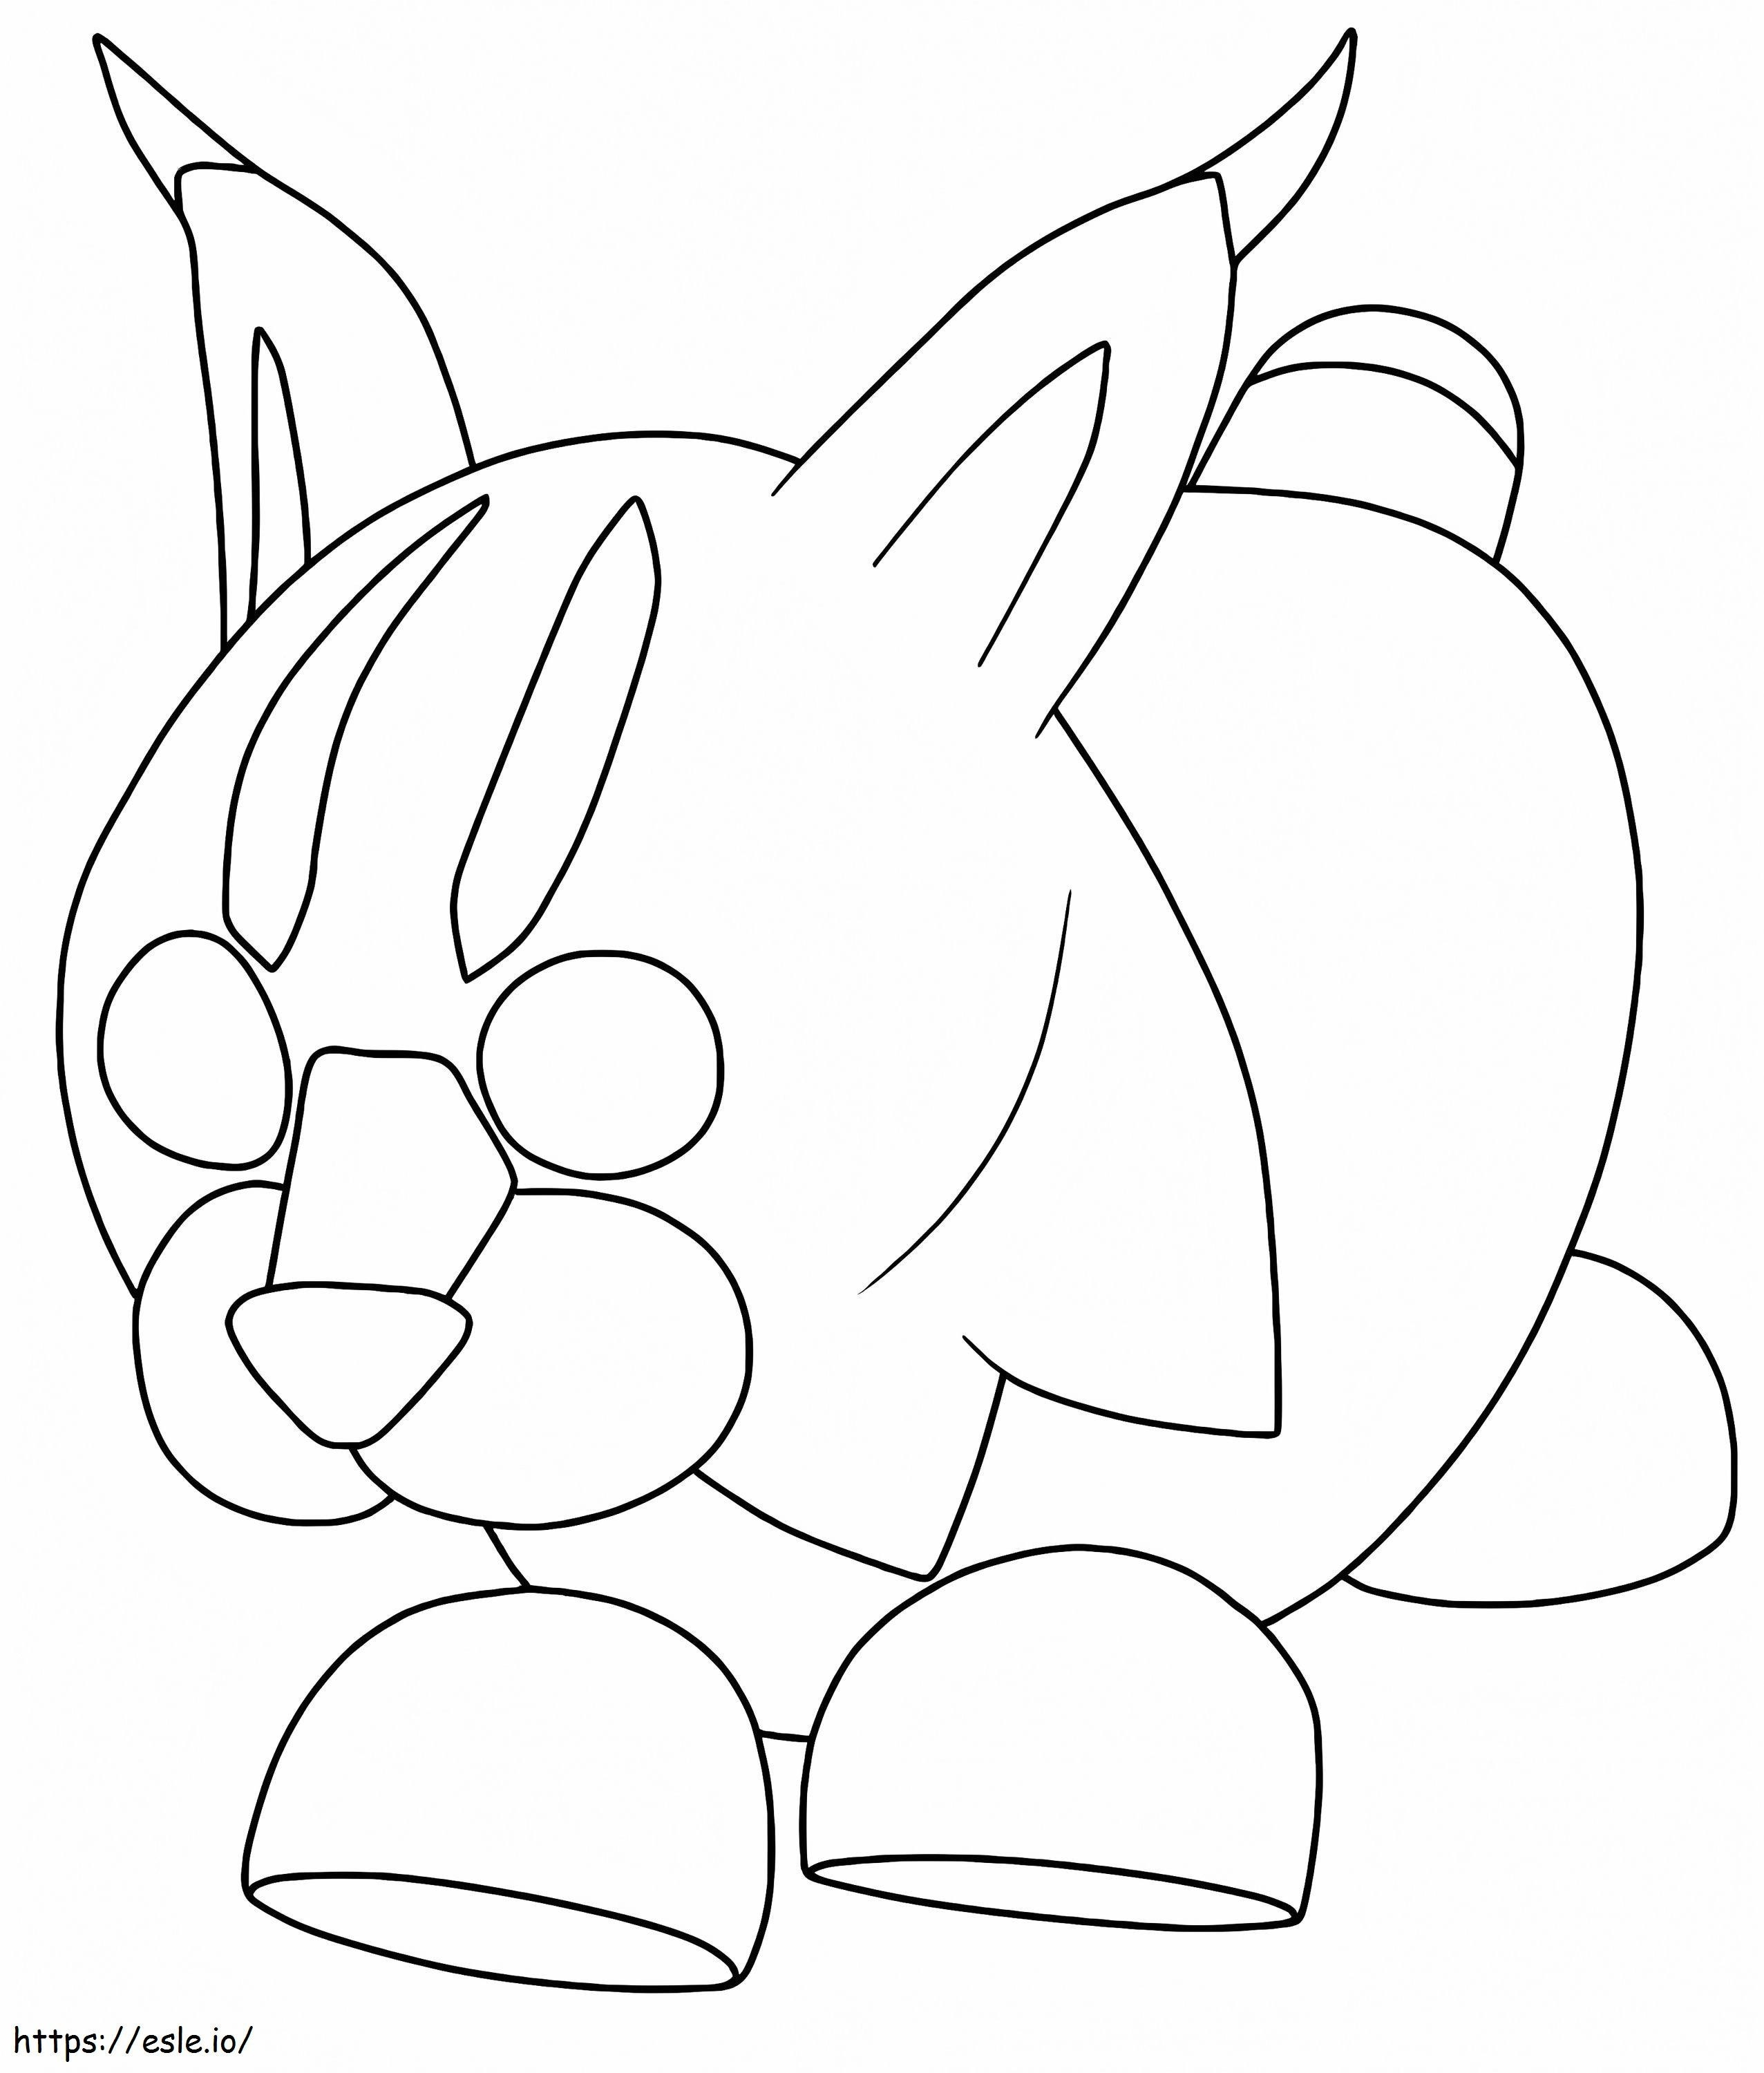 Wildcat Adopt Me coloring page